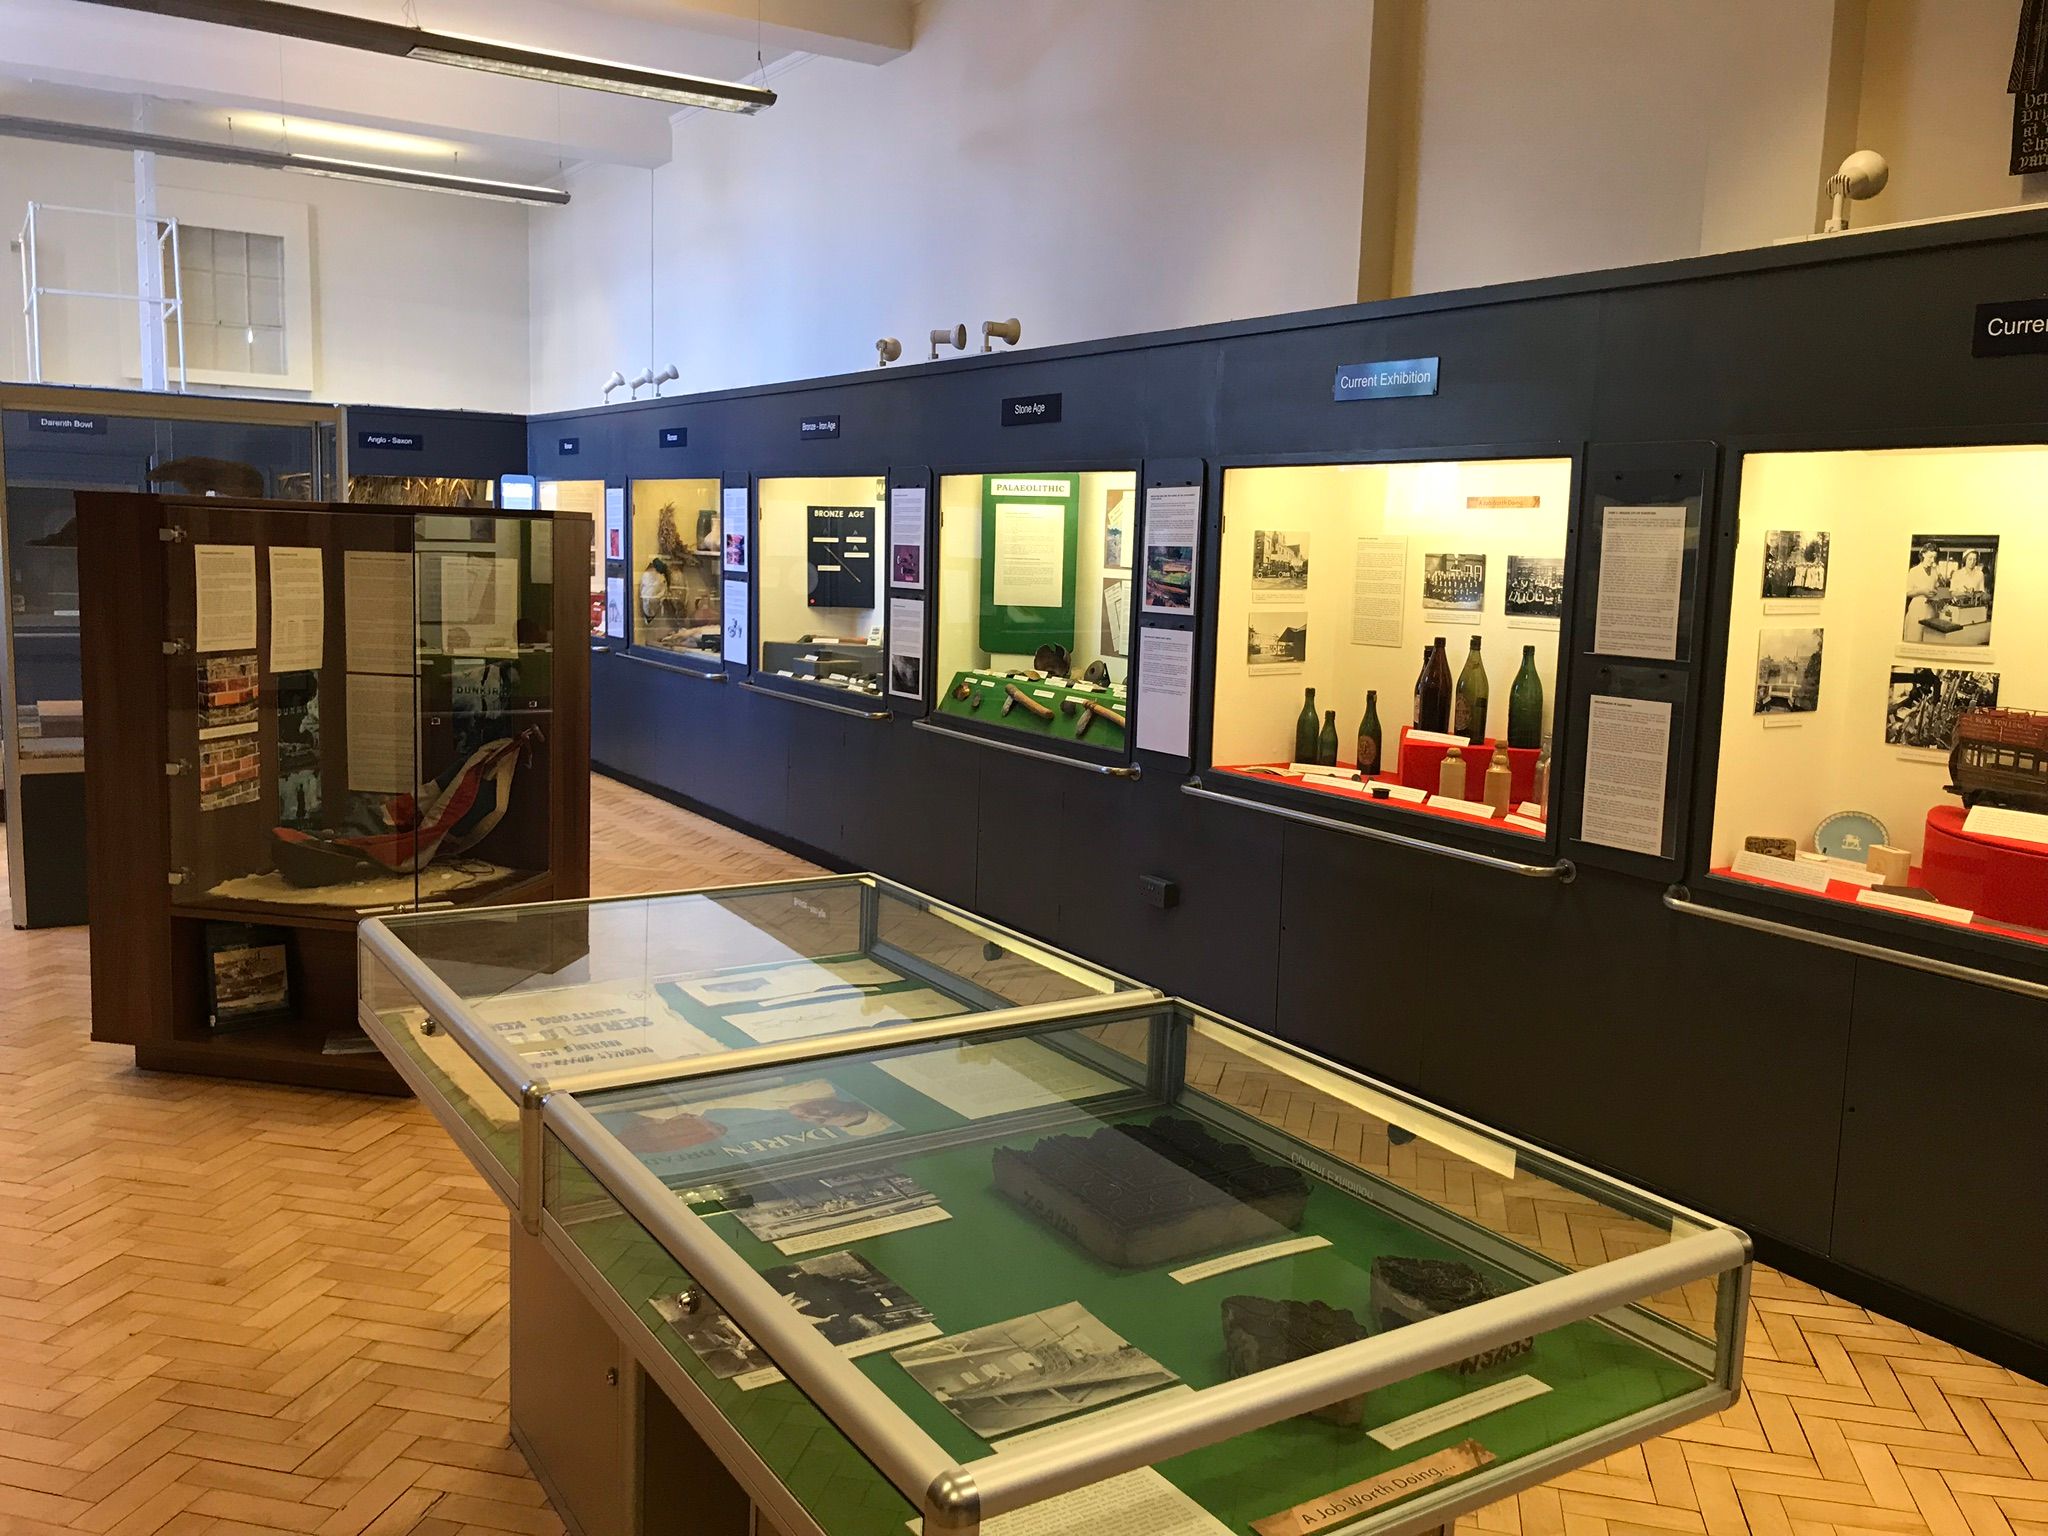 Displays inside the museum